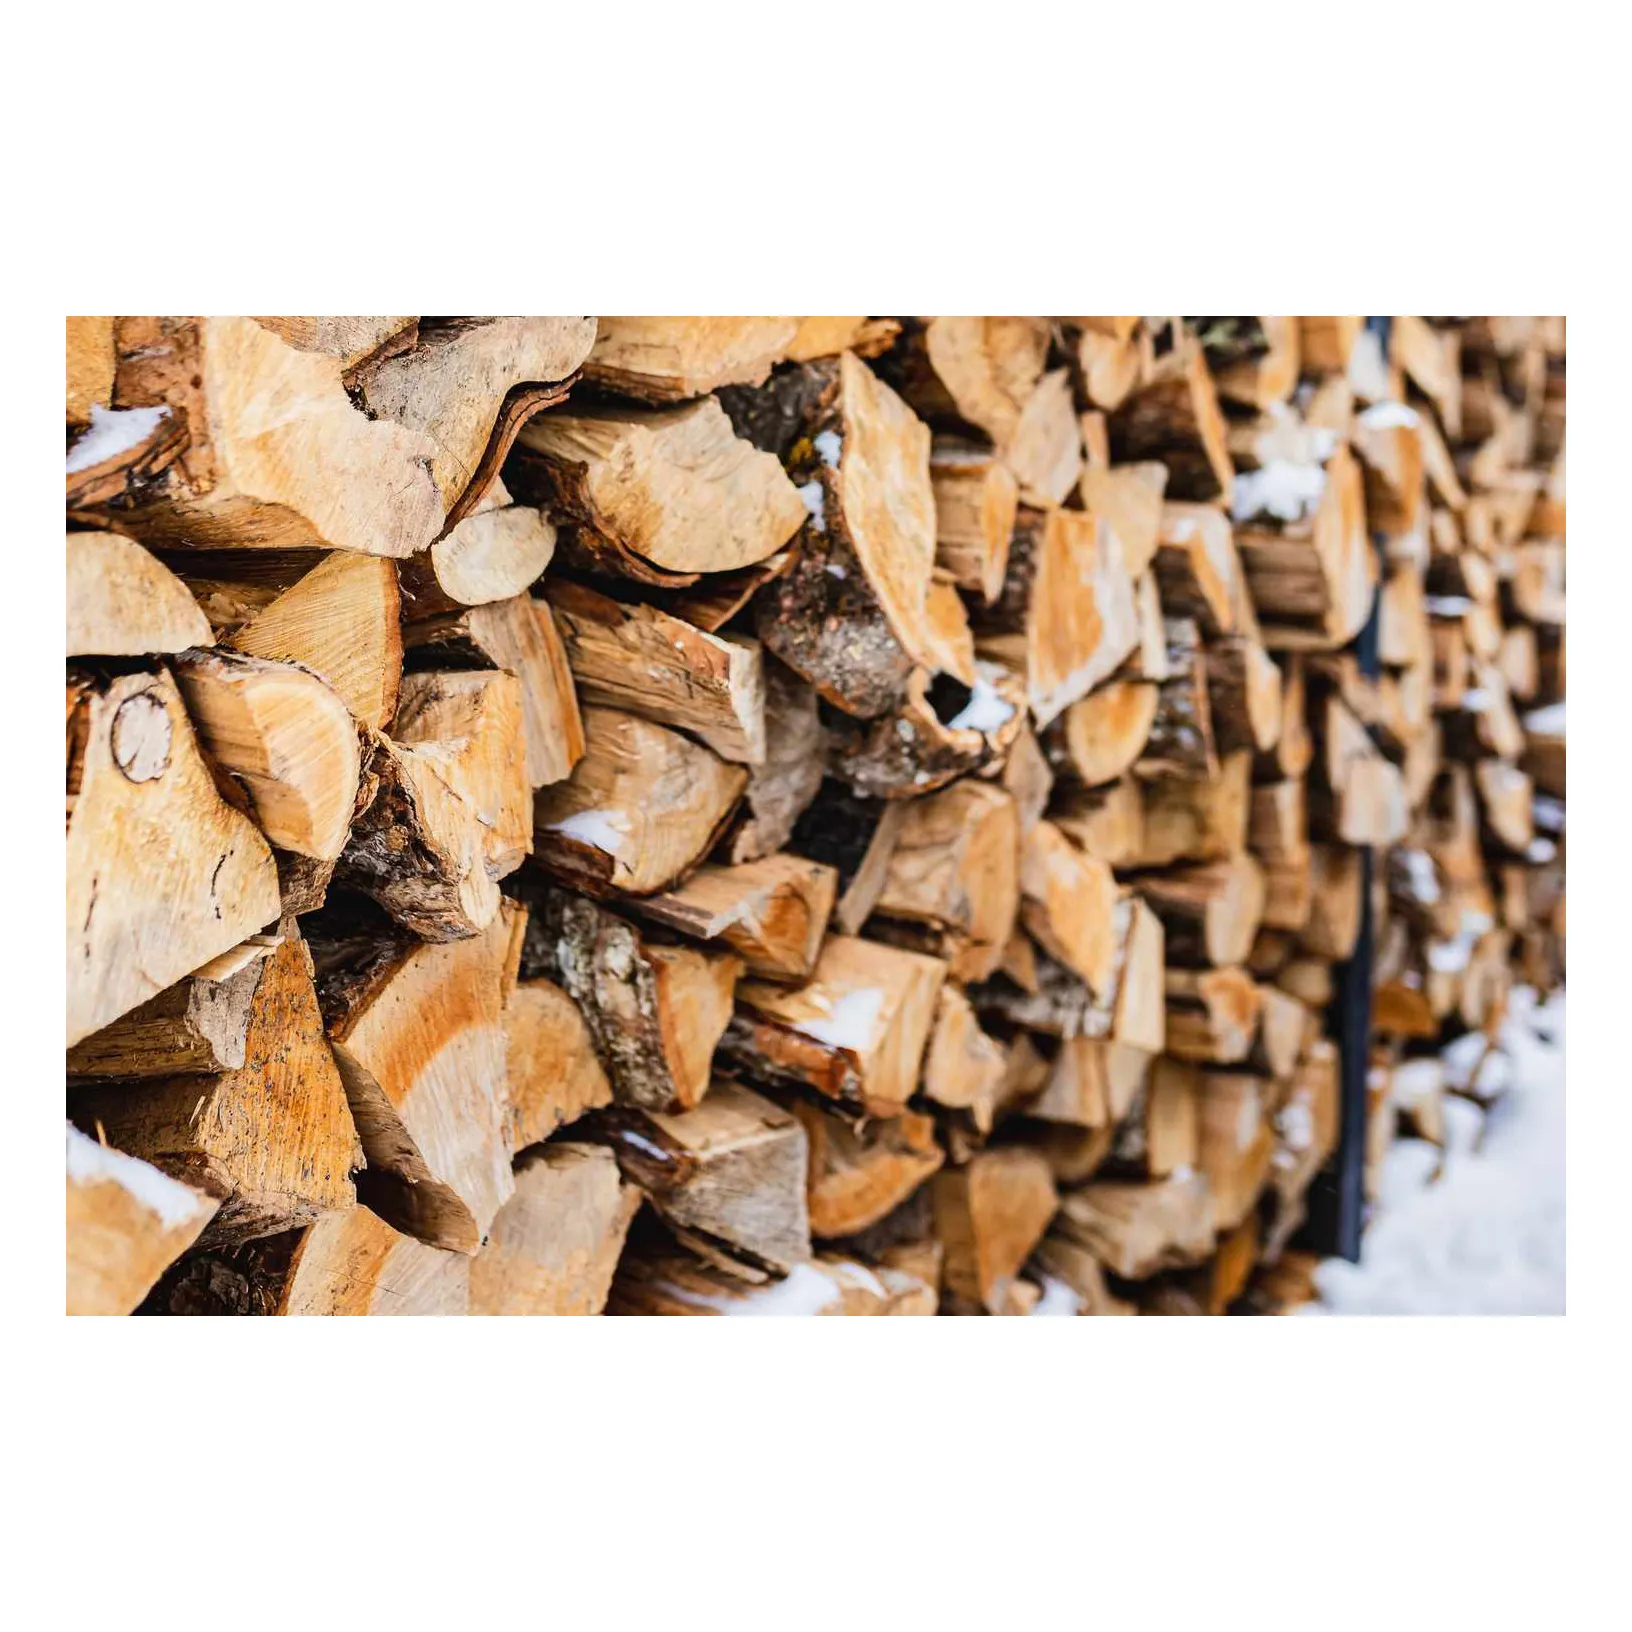 QUALITY CHEAP HOT SALE 100% ACACIA WOOD AND PINE FIREWOOD AND BIRCH FIREWOOD IN BAGS FOR SALE WORLDWIDE